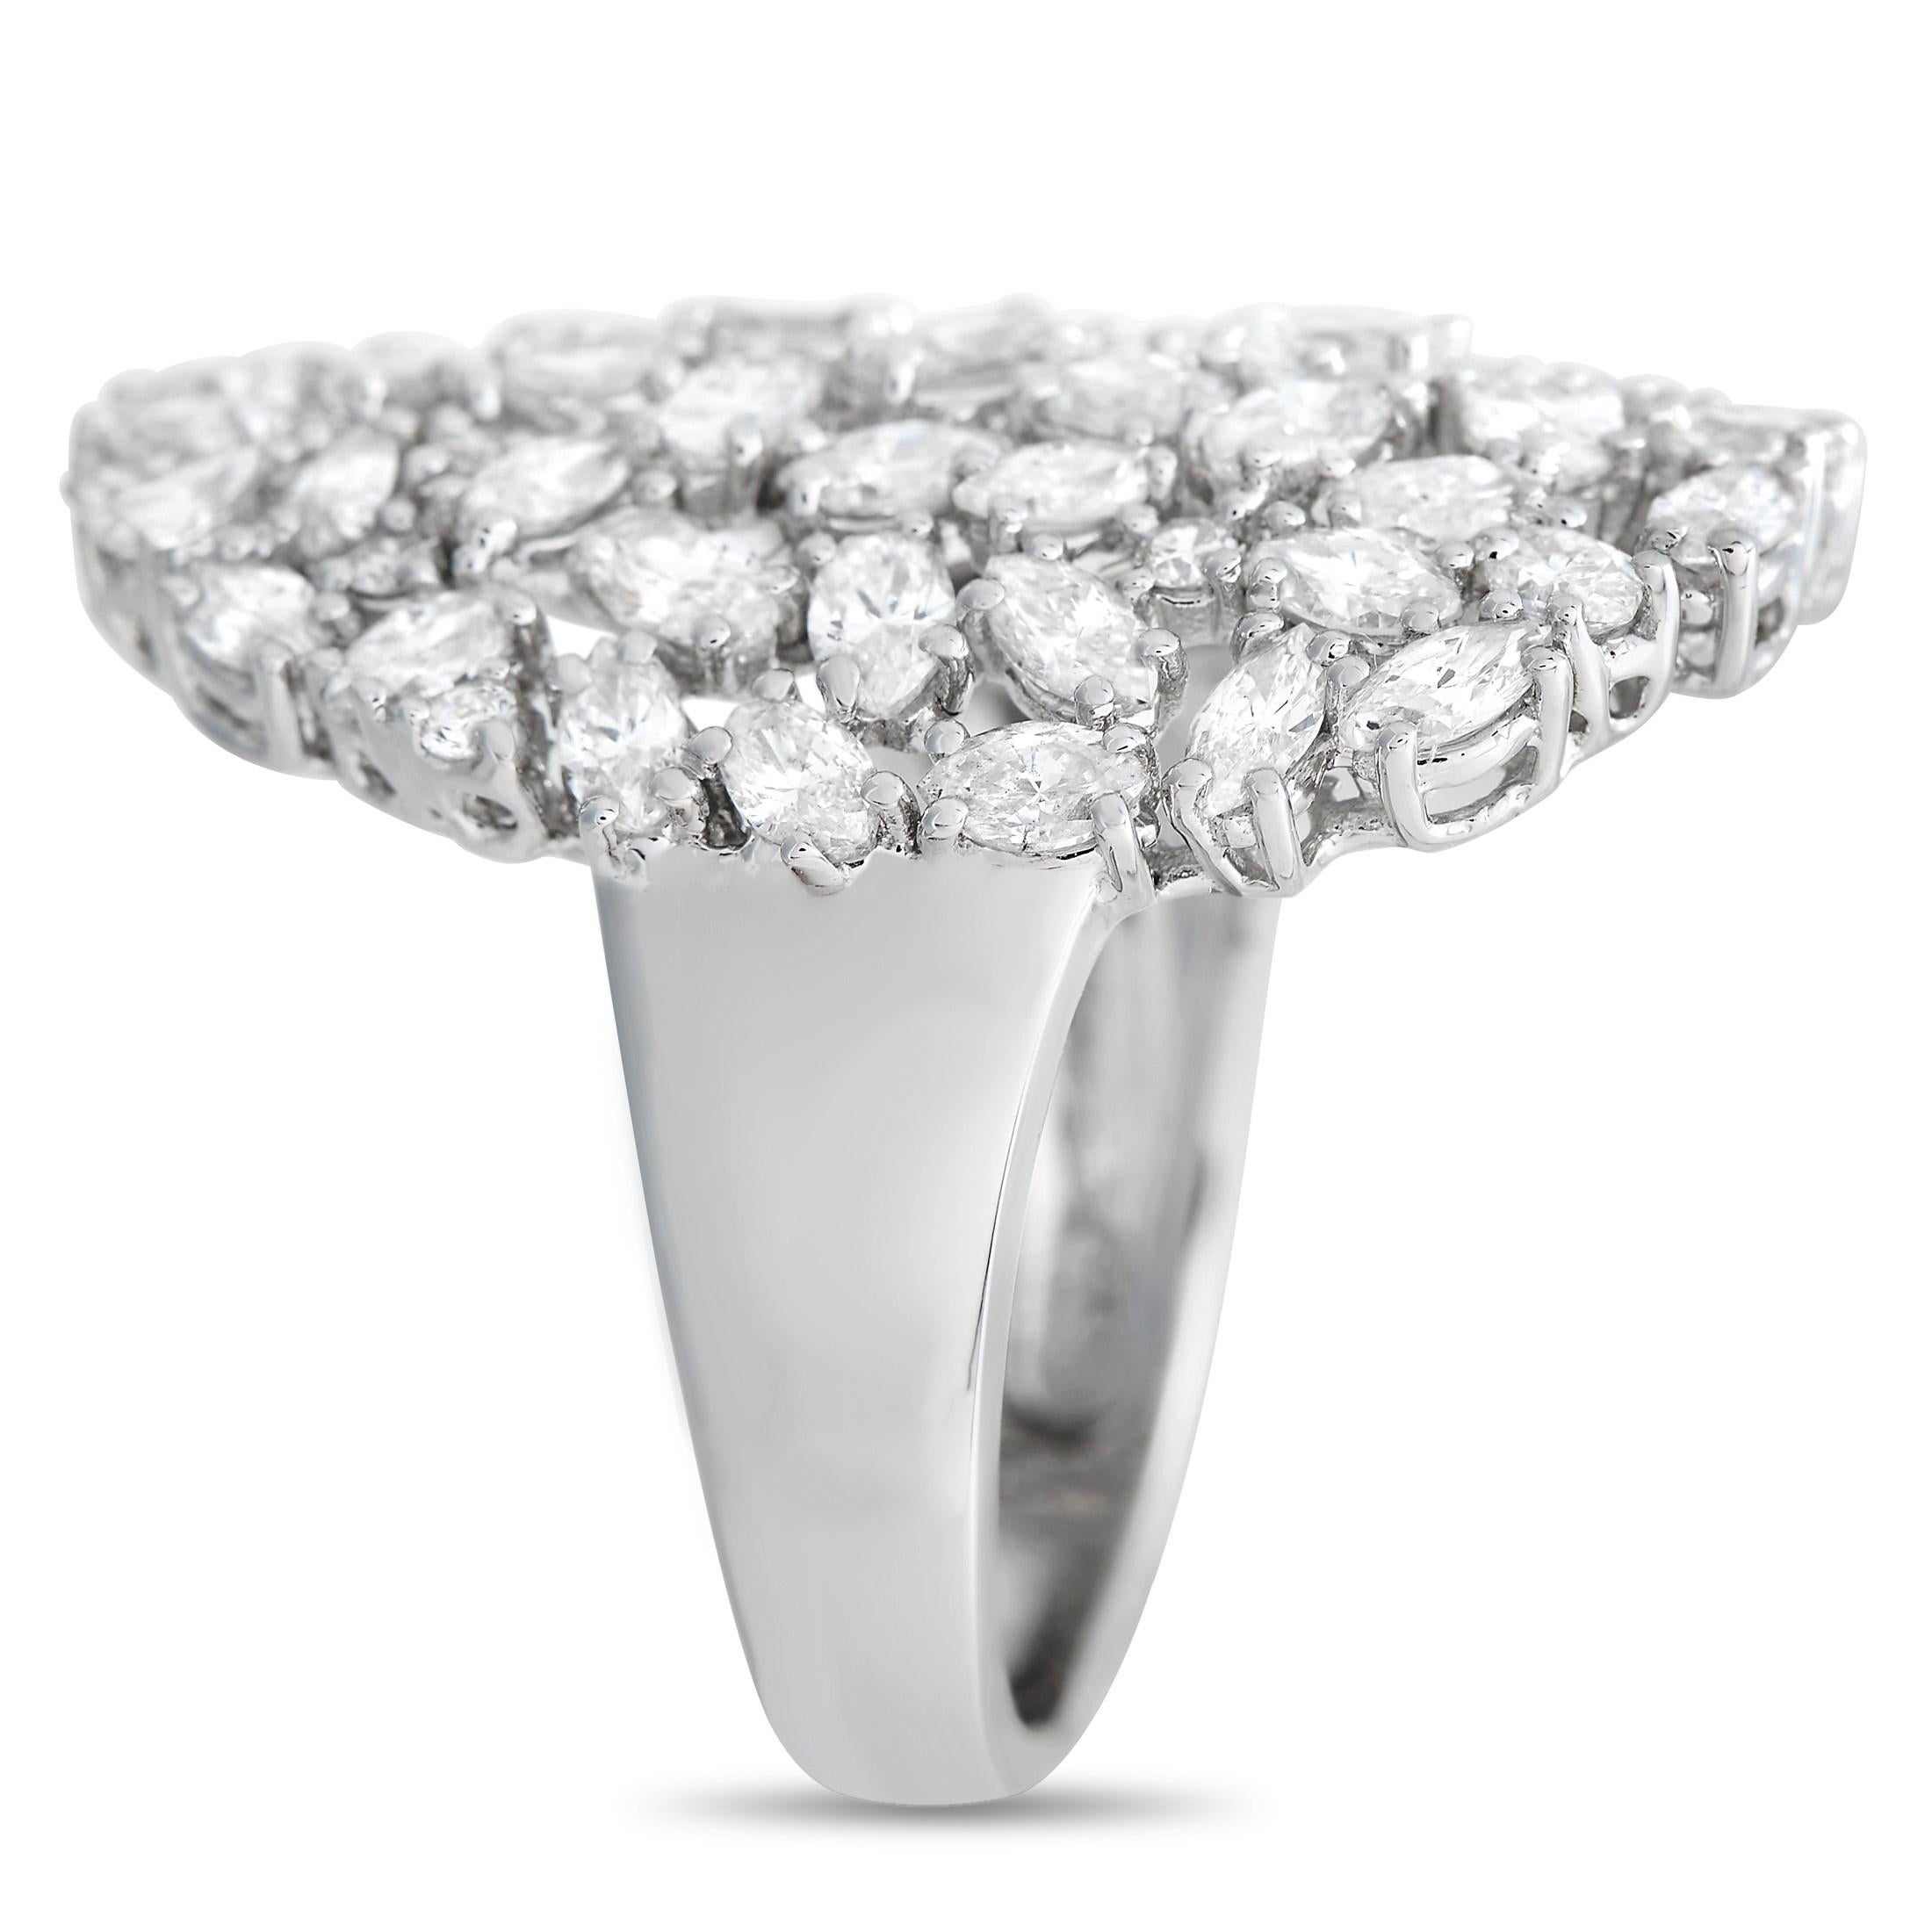 A creative arrangement of diamonds totaling 2.94 carats allows this 18K White Gold ring to effortlessly radiate light. It features a 4mm wide band and a 2mm top height, meaning this statement-making piece is also incredibly wearable.

This jewelry